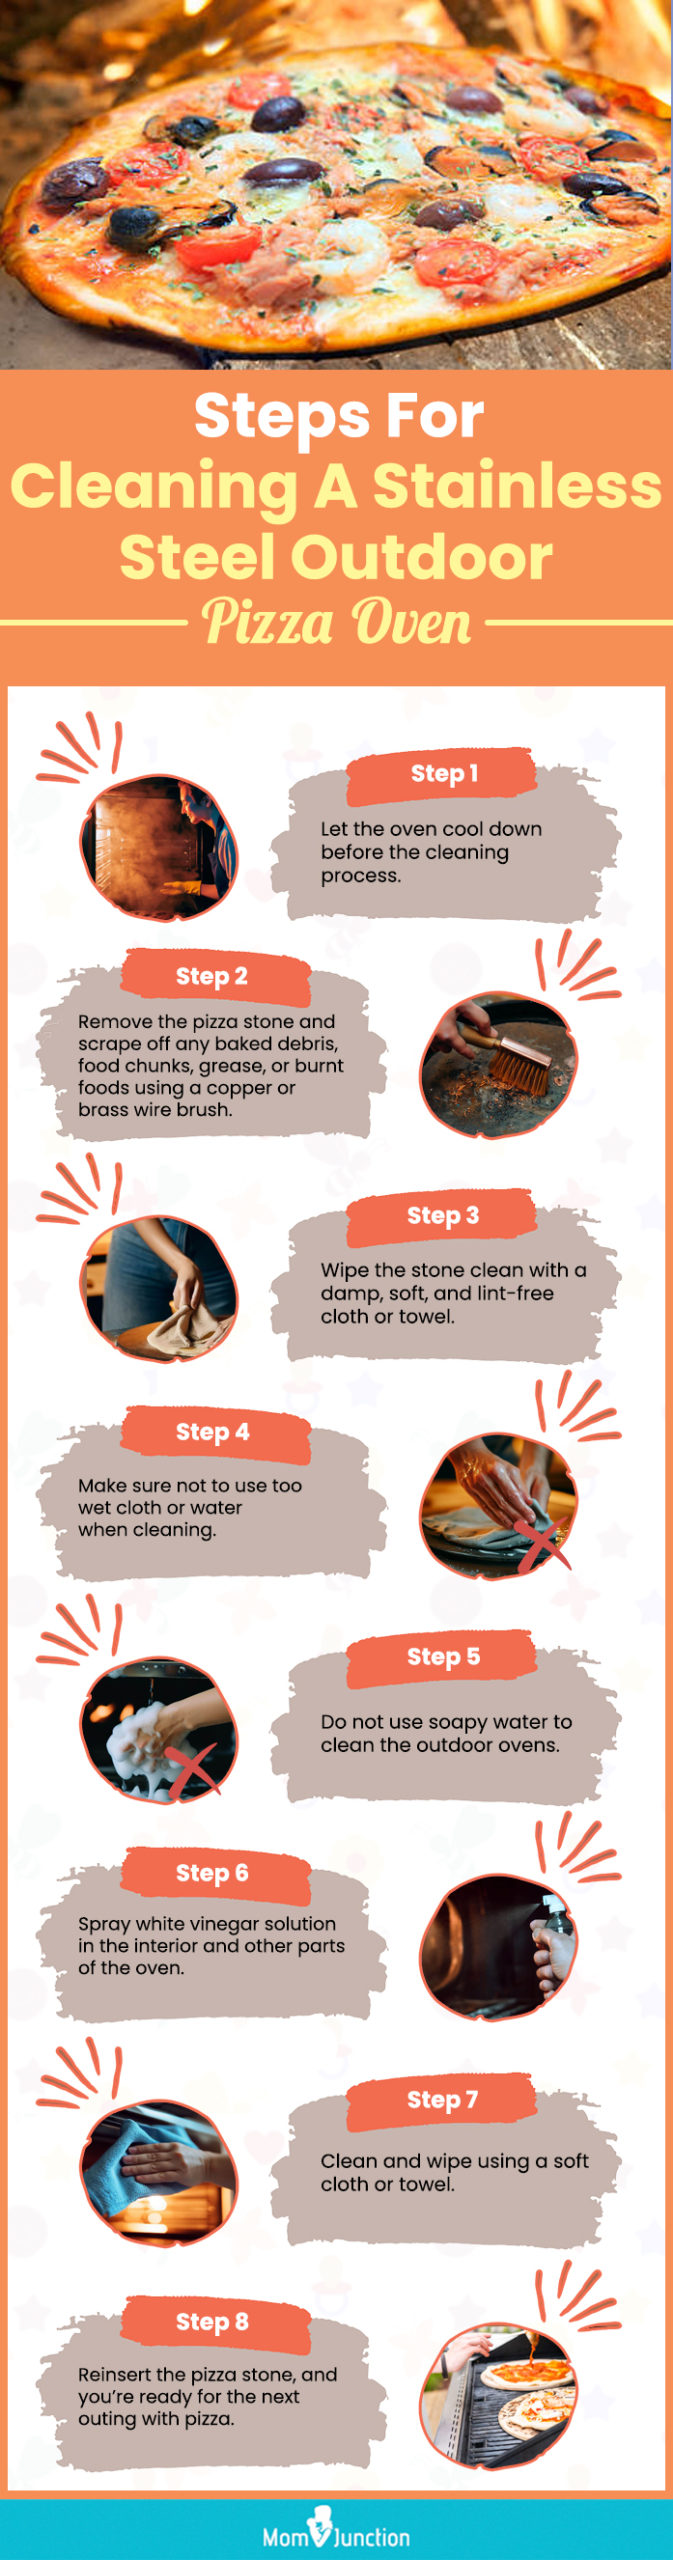 Steps For Cleaning A Stainless Steel Outdoor Pizza Oven (infographic)